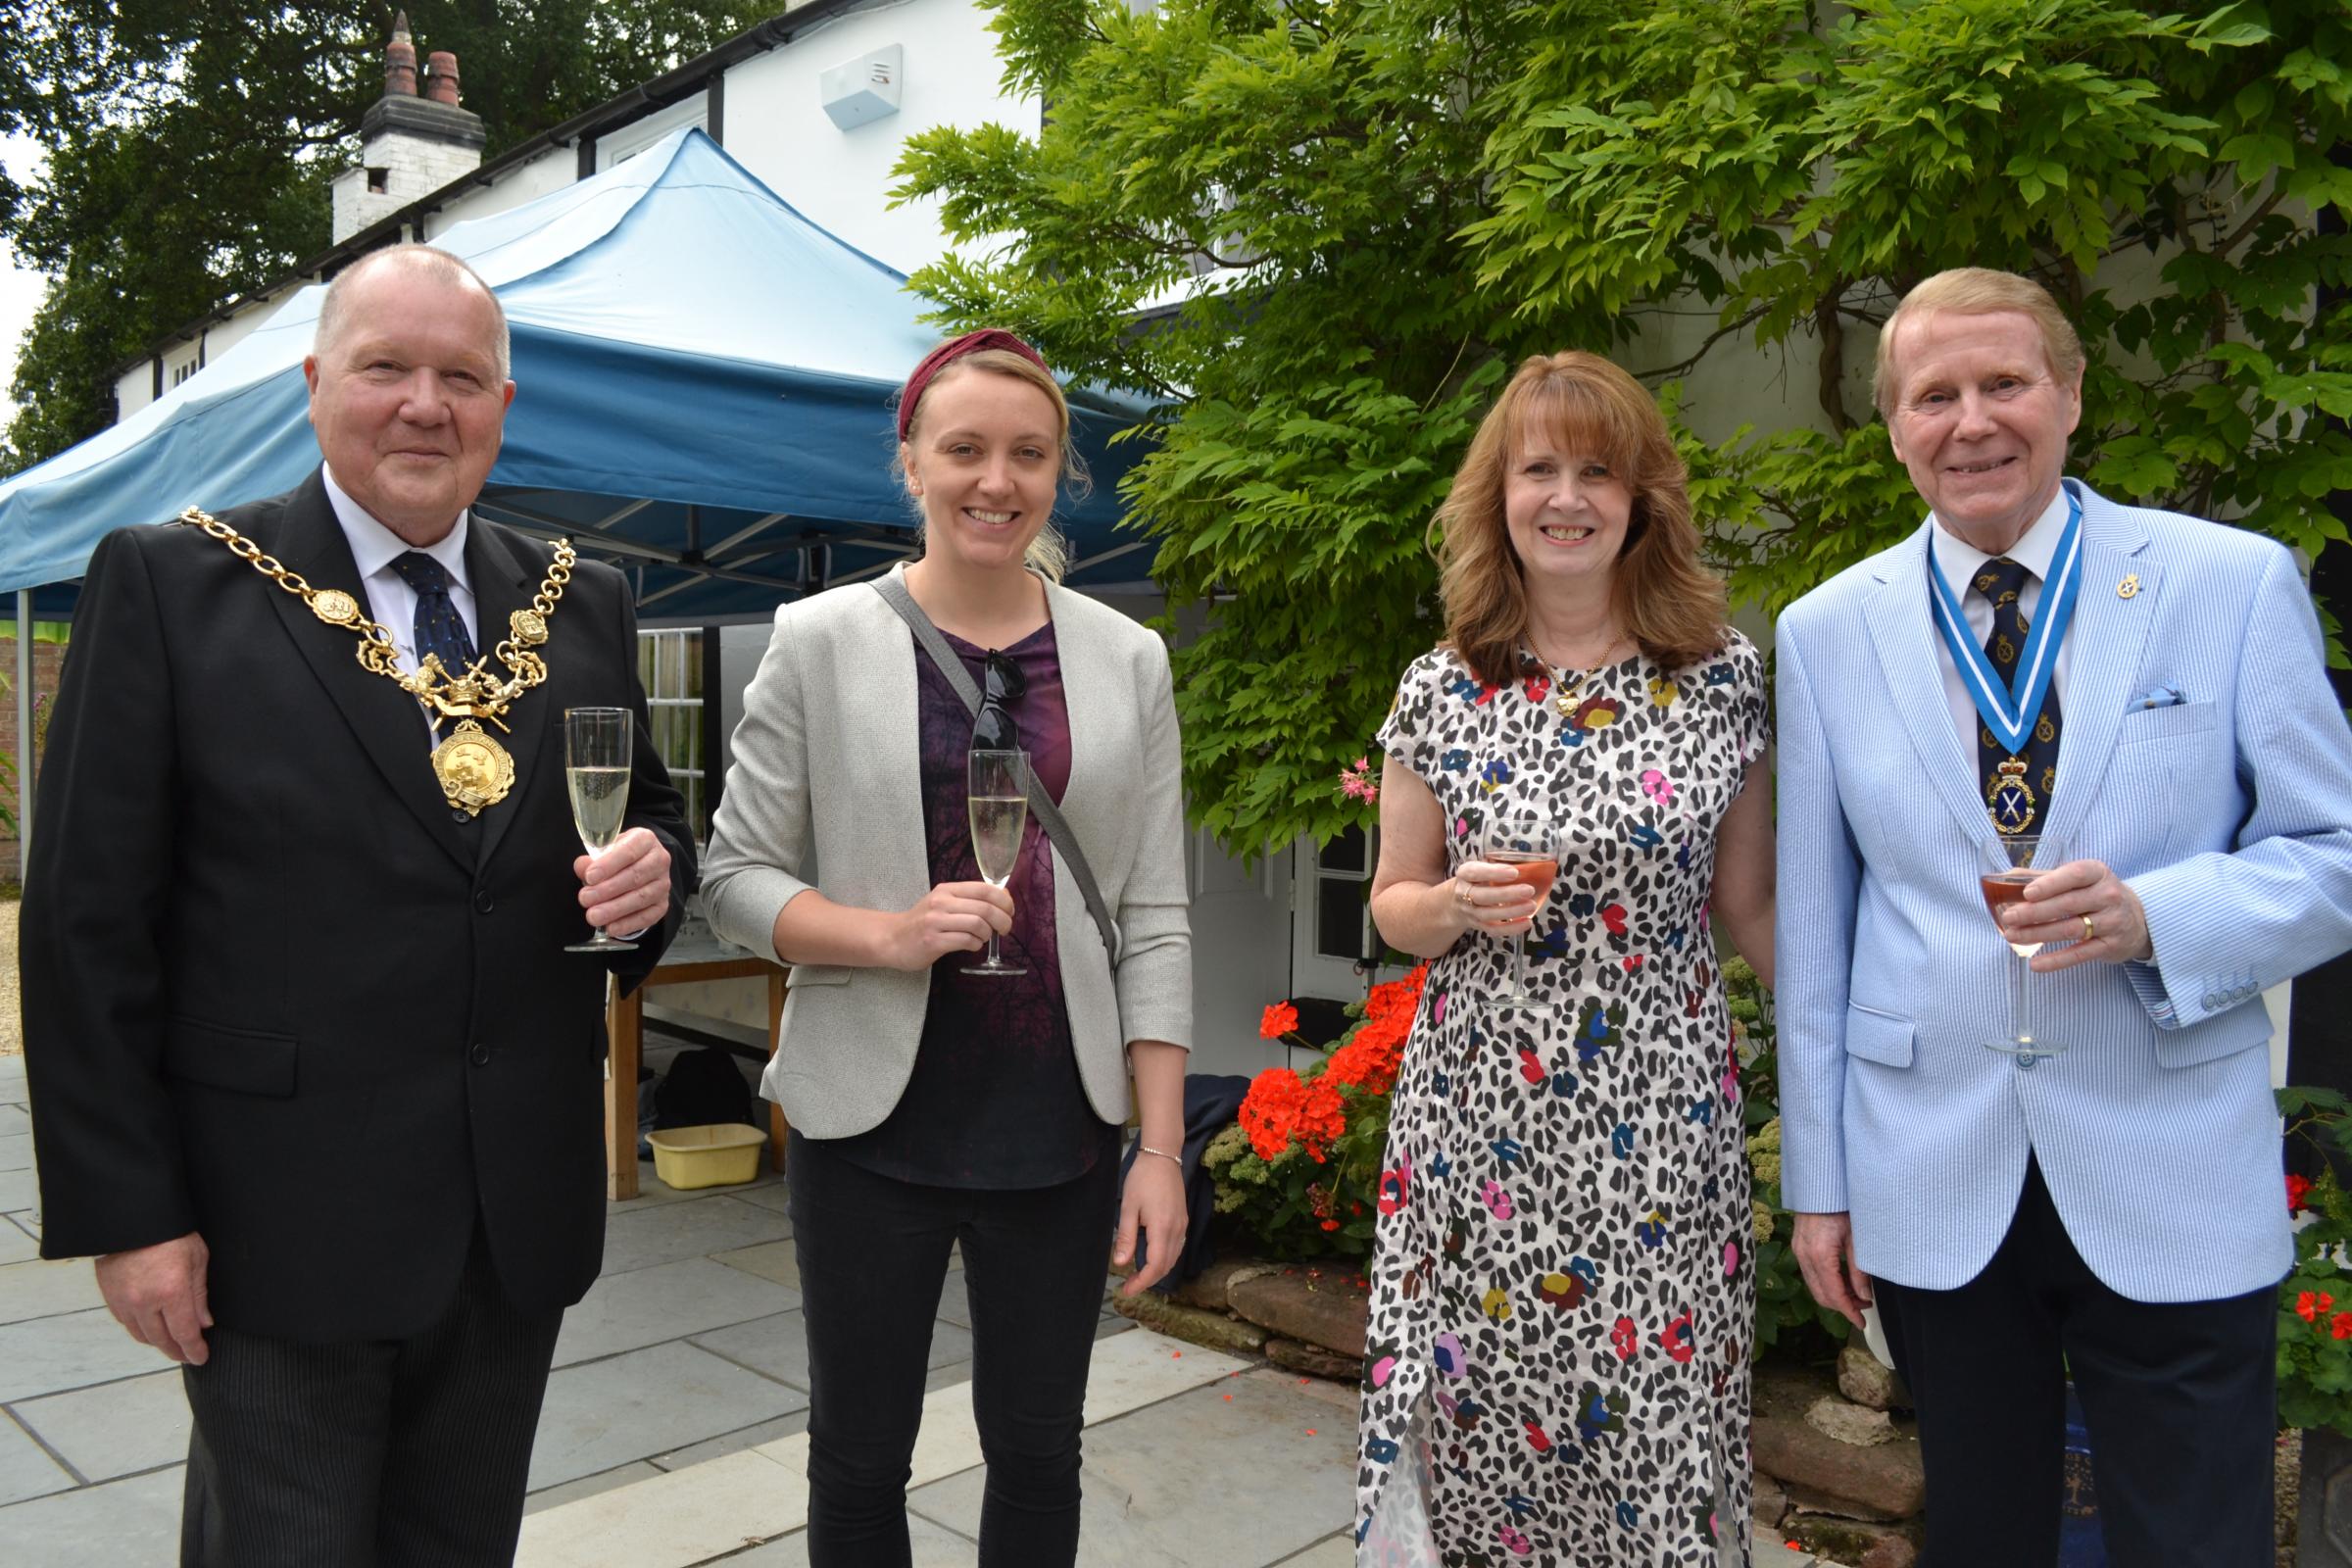 Lord Mayor of Chester (Cllr Martyn Delany), Mayor’s Consort (Katie Mayers), Hayley Mee and High Sheriff of Cheshire (Robert Mee DL).